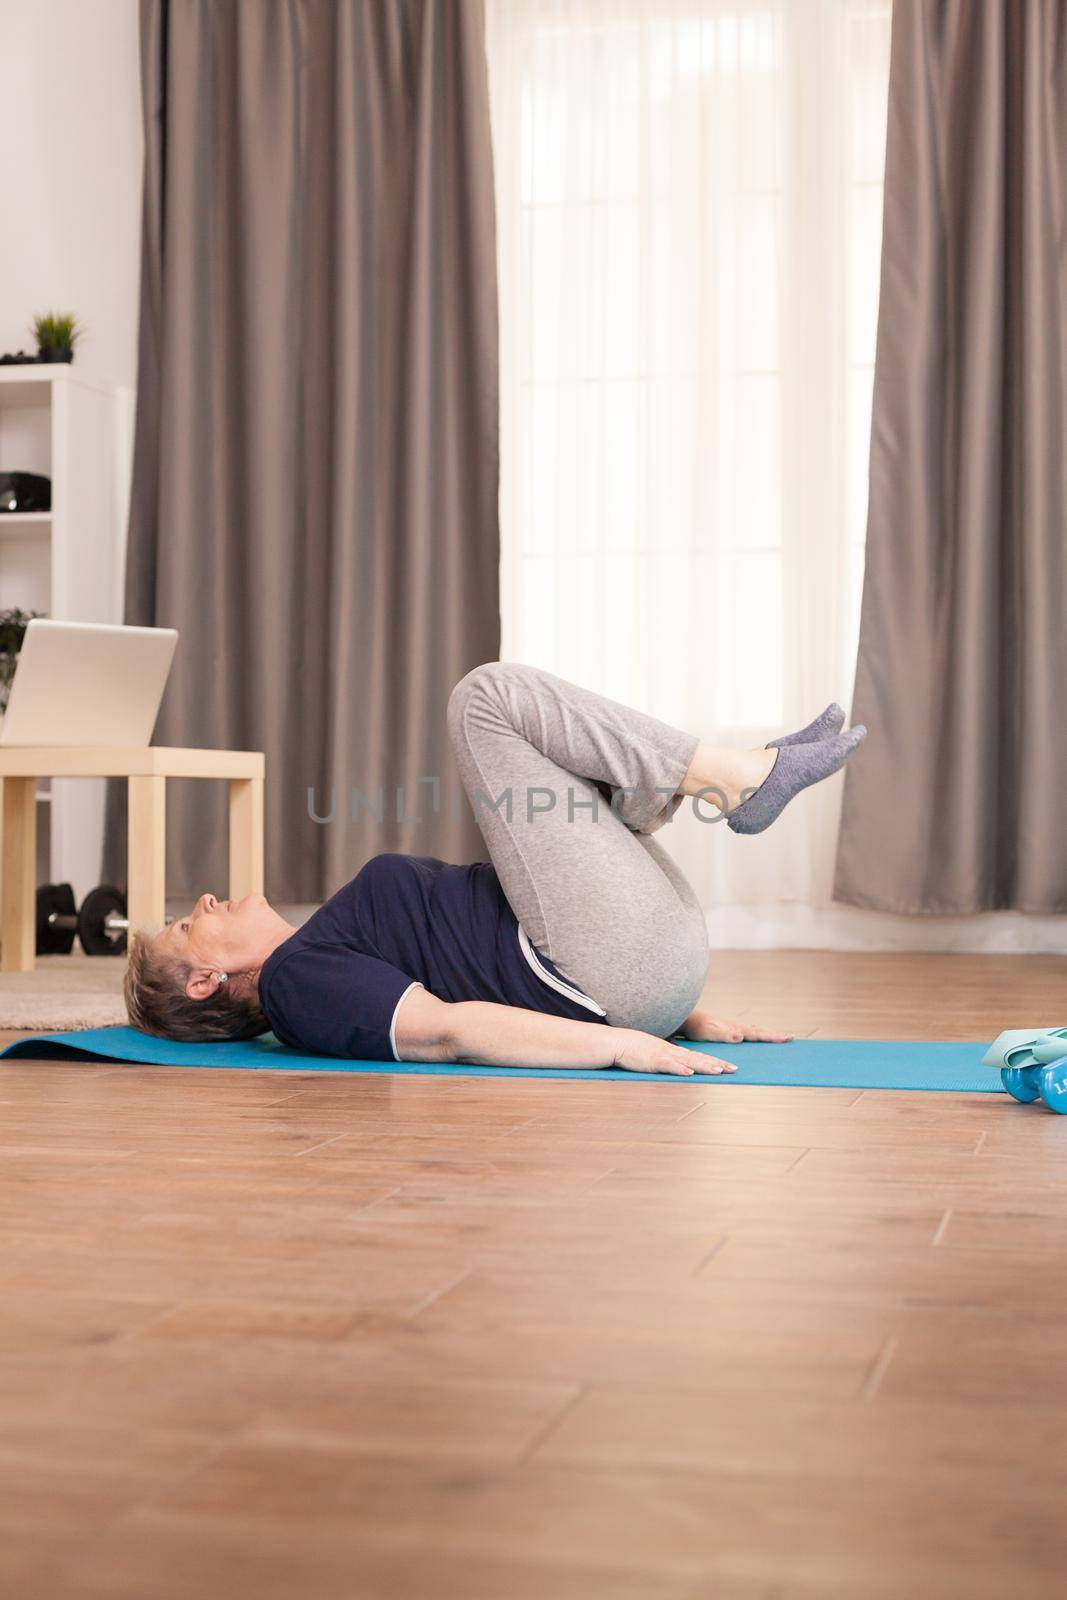 Elderly age woman doing abs physical training in living room on the yoga mat. Old person pensioner online internet exercise training at home sport activity with dumbbell, resistance band, swiss ball at elderly retirement age